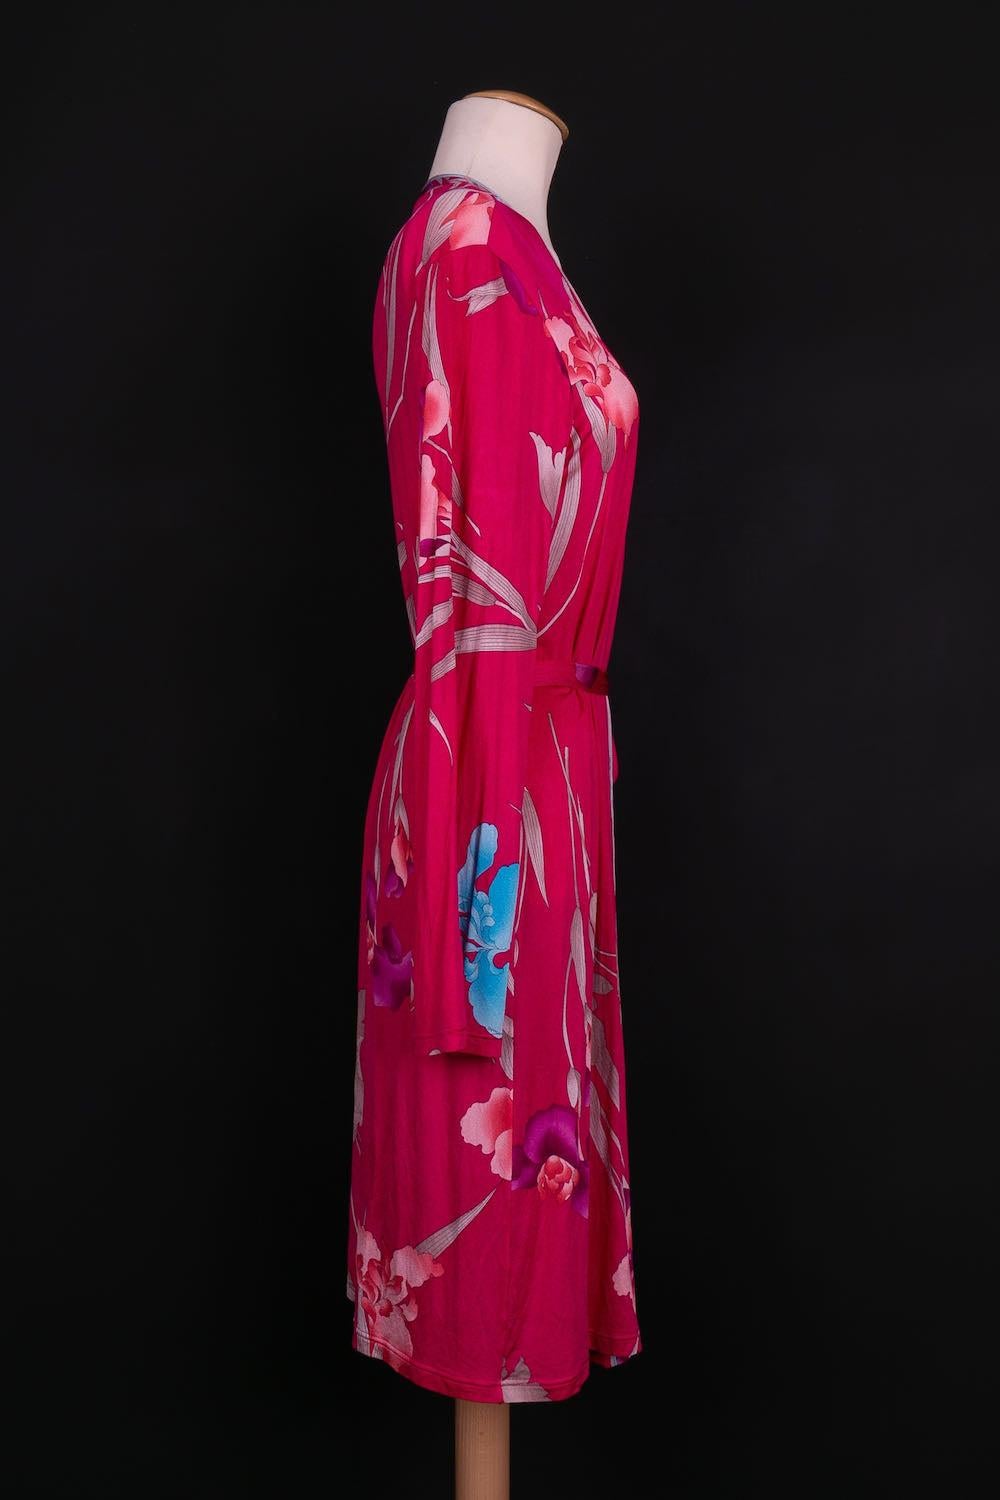 Leonard - (Made in Italy) Floral print dress on a fuchsia pink background. Size 42FR.

Additional information:
Condition: Very good condition
Dimensions: Shoulder width: 36 cm - Chest: 47 cm - Sleeve length: 62 cm - Length: 100 cm

Seller Reference: